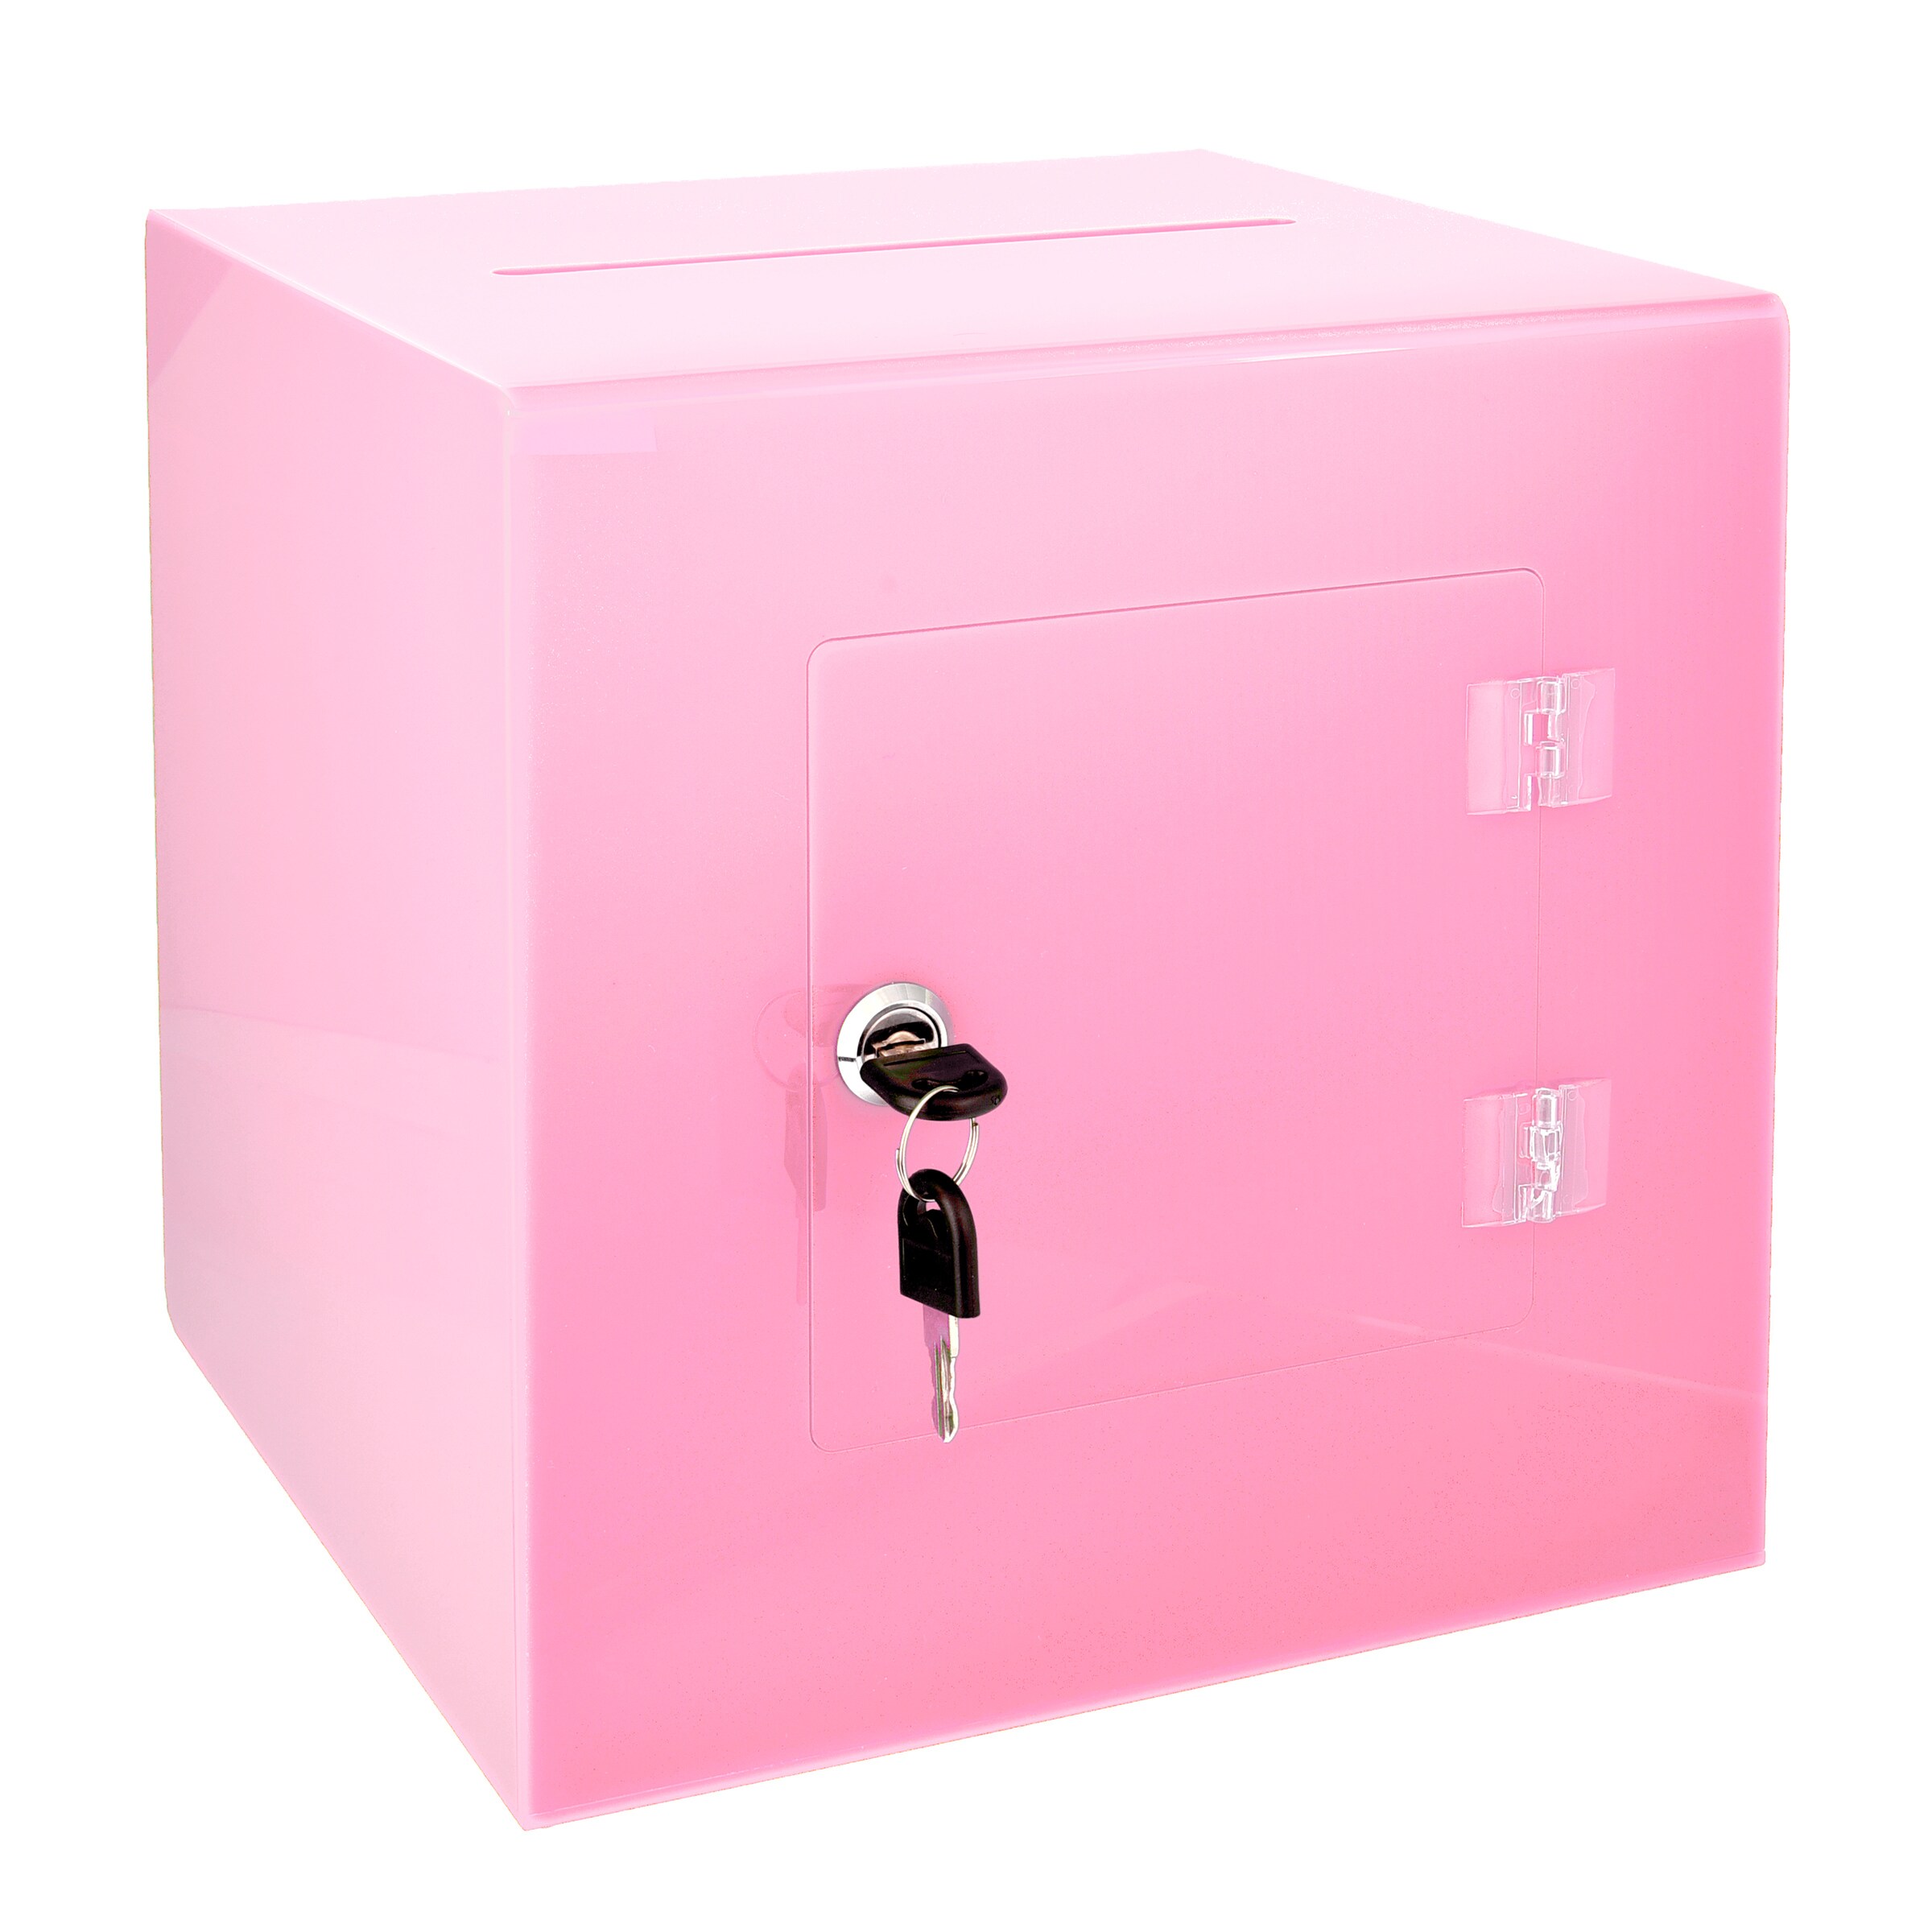 Acrylic Red Wall Donation Charity Box Suggestion Box With Lock And 2 Keys 02 